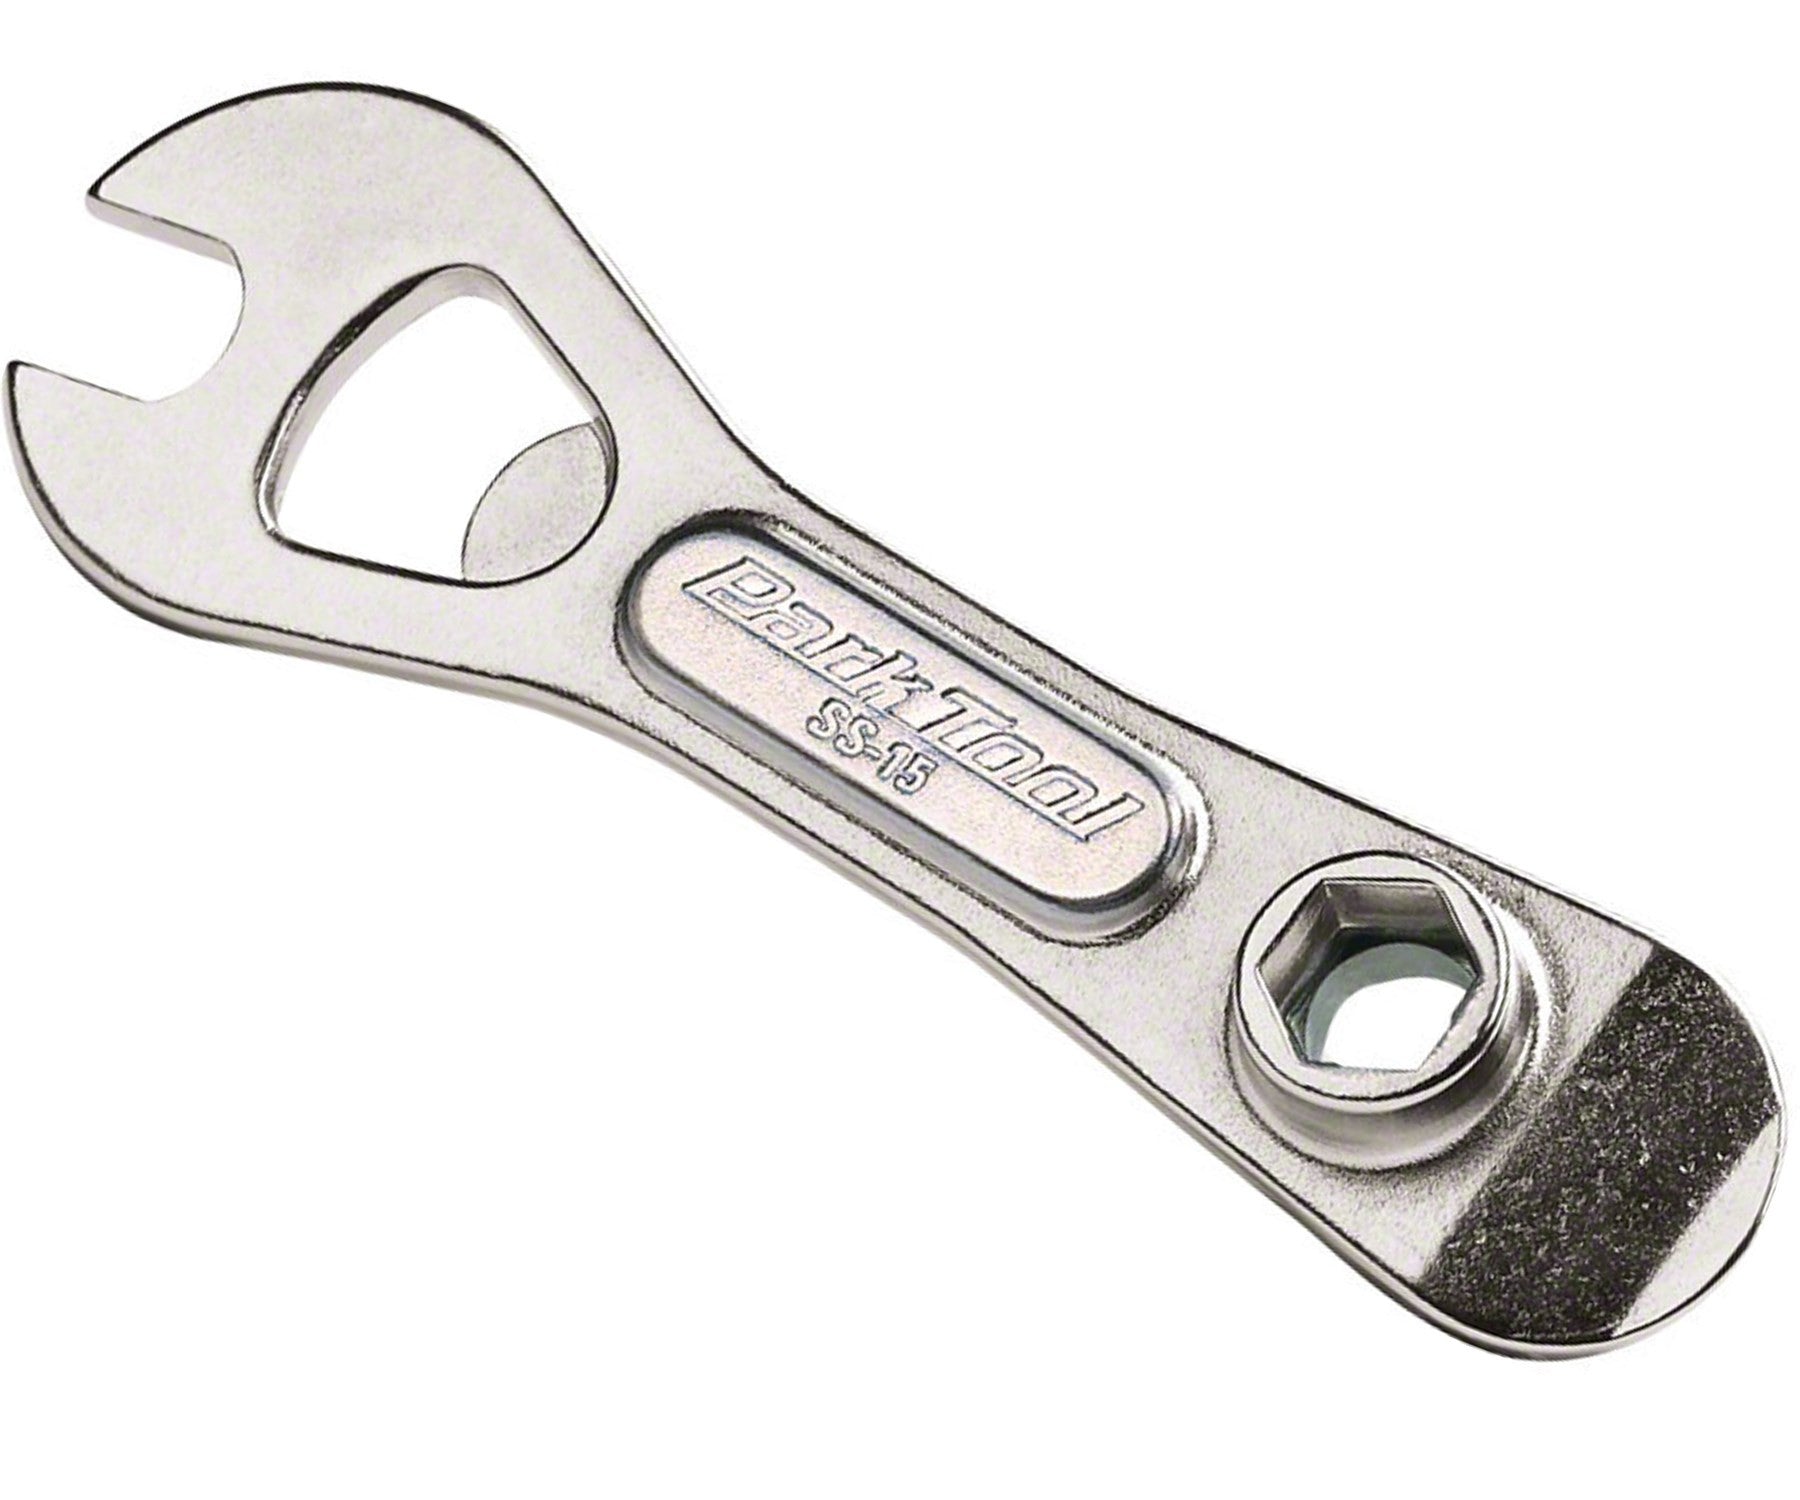 Park Tool SS-15C spanner - Retrogression Fixed Gear